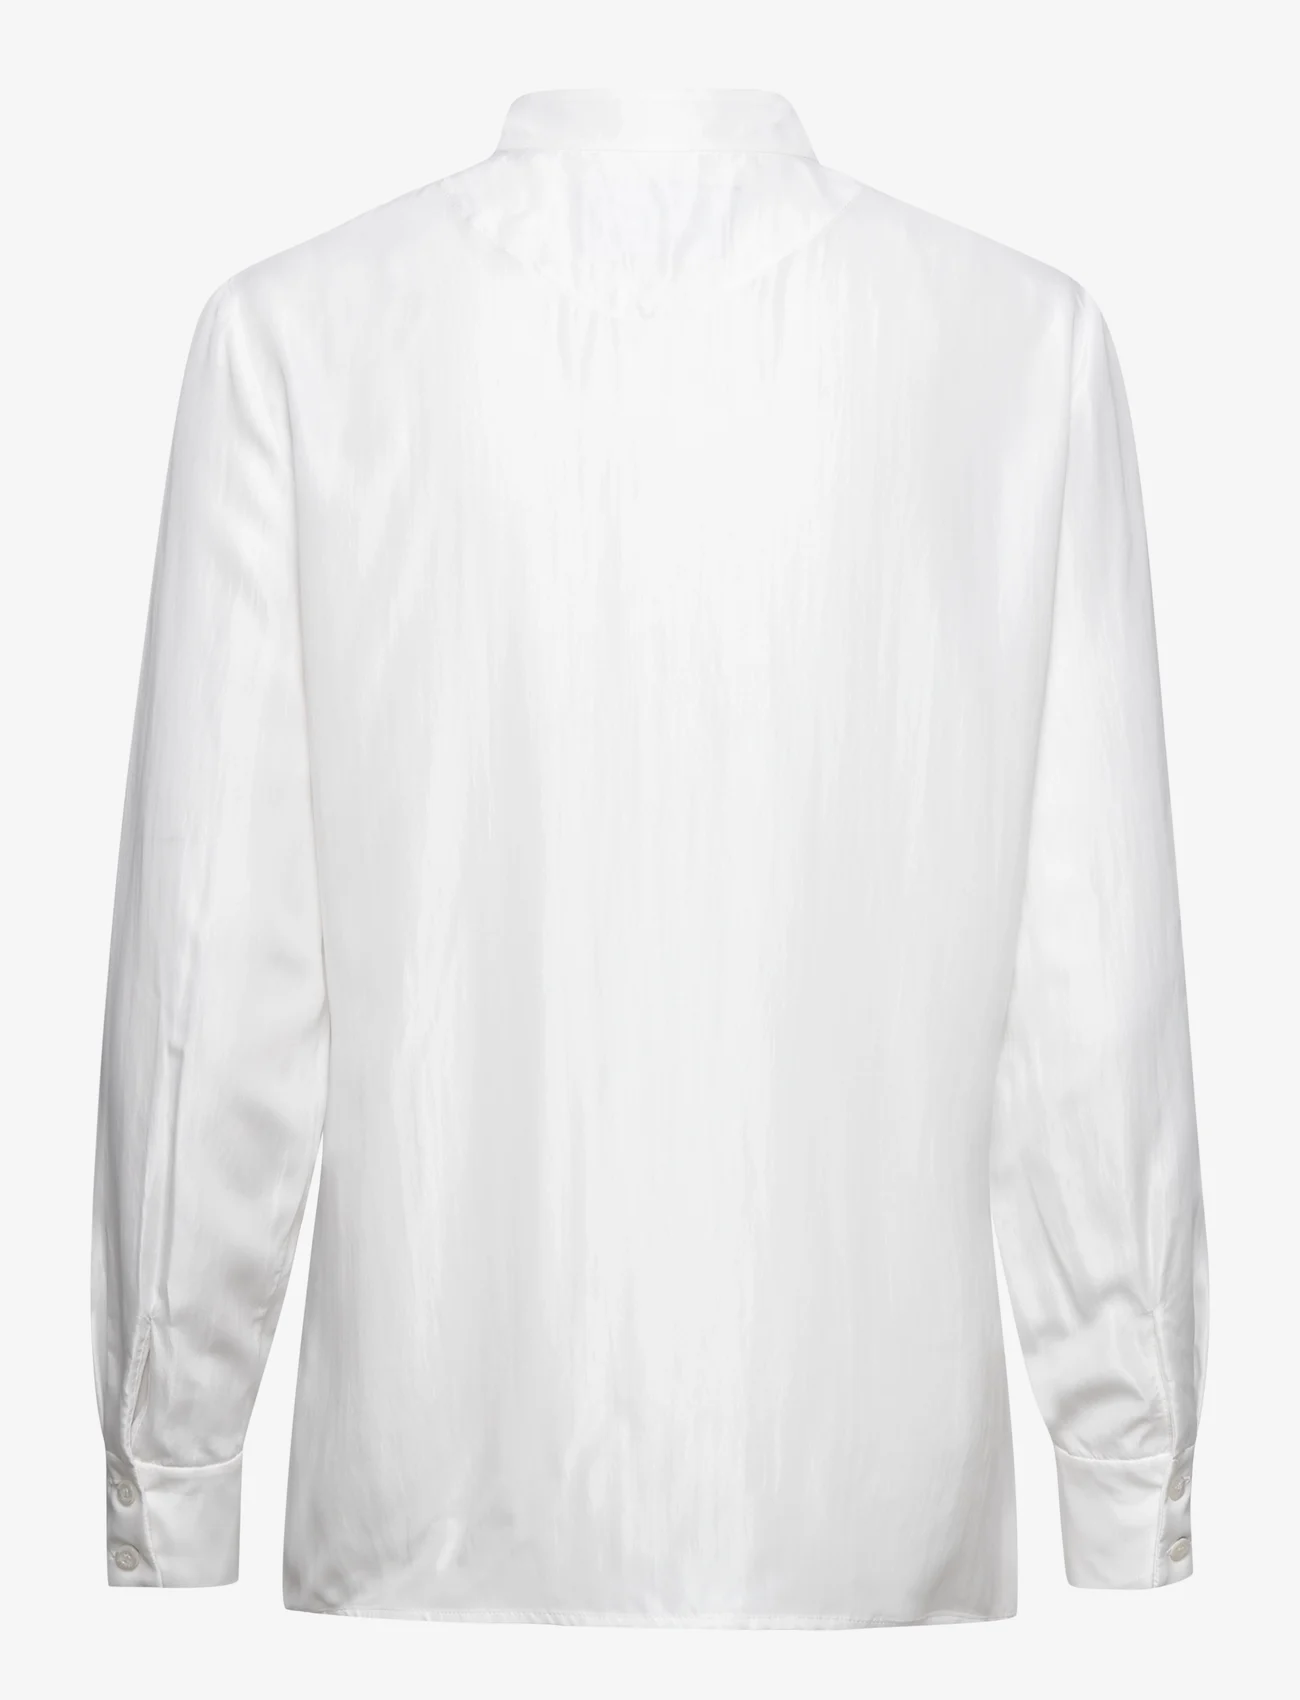 Boutique Moschino - Blouse - long-sleeved shirts - white - 1